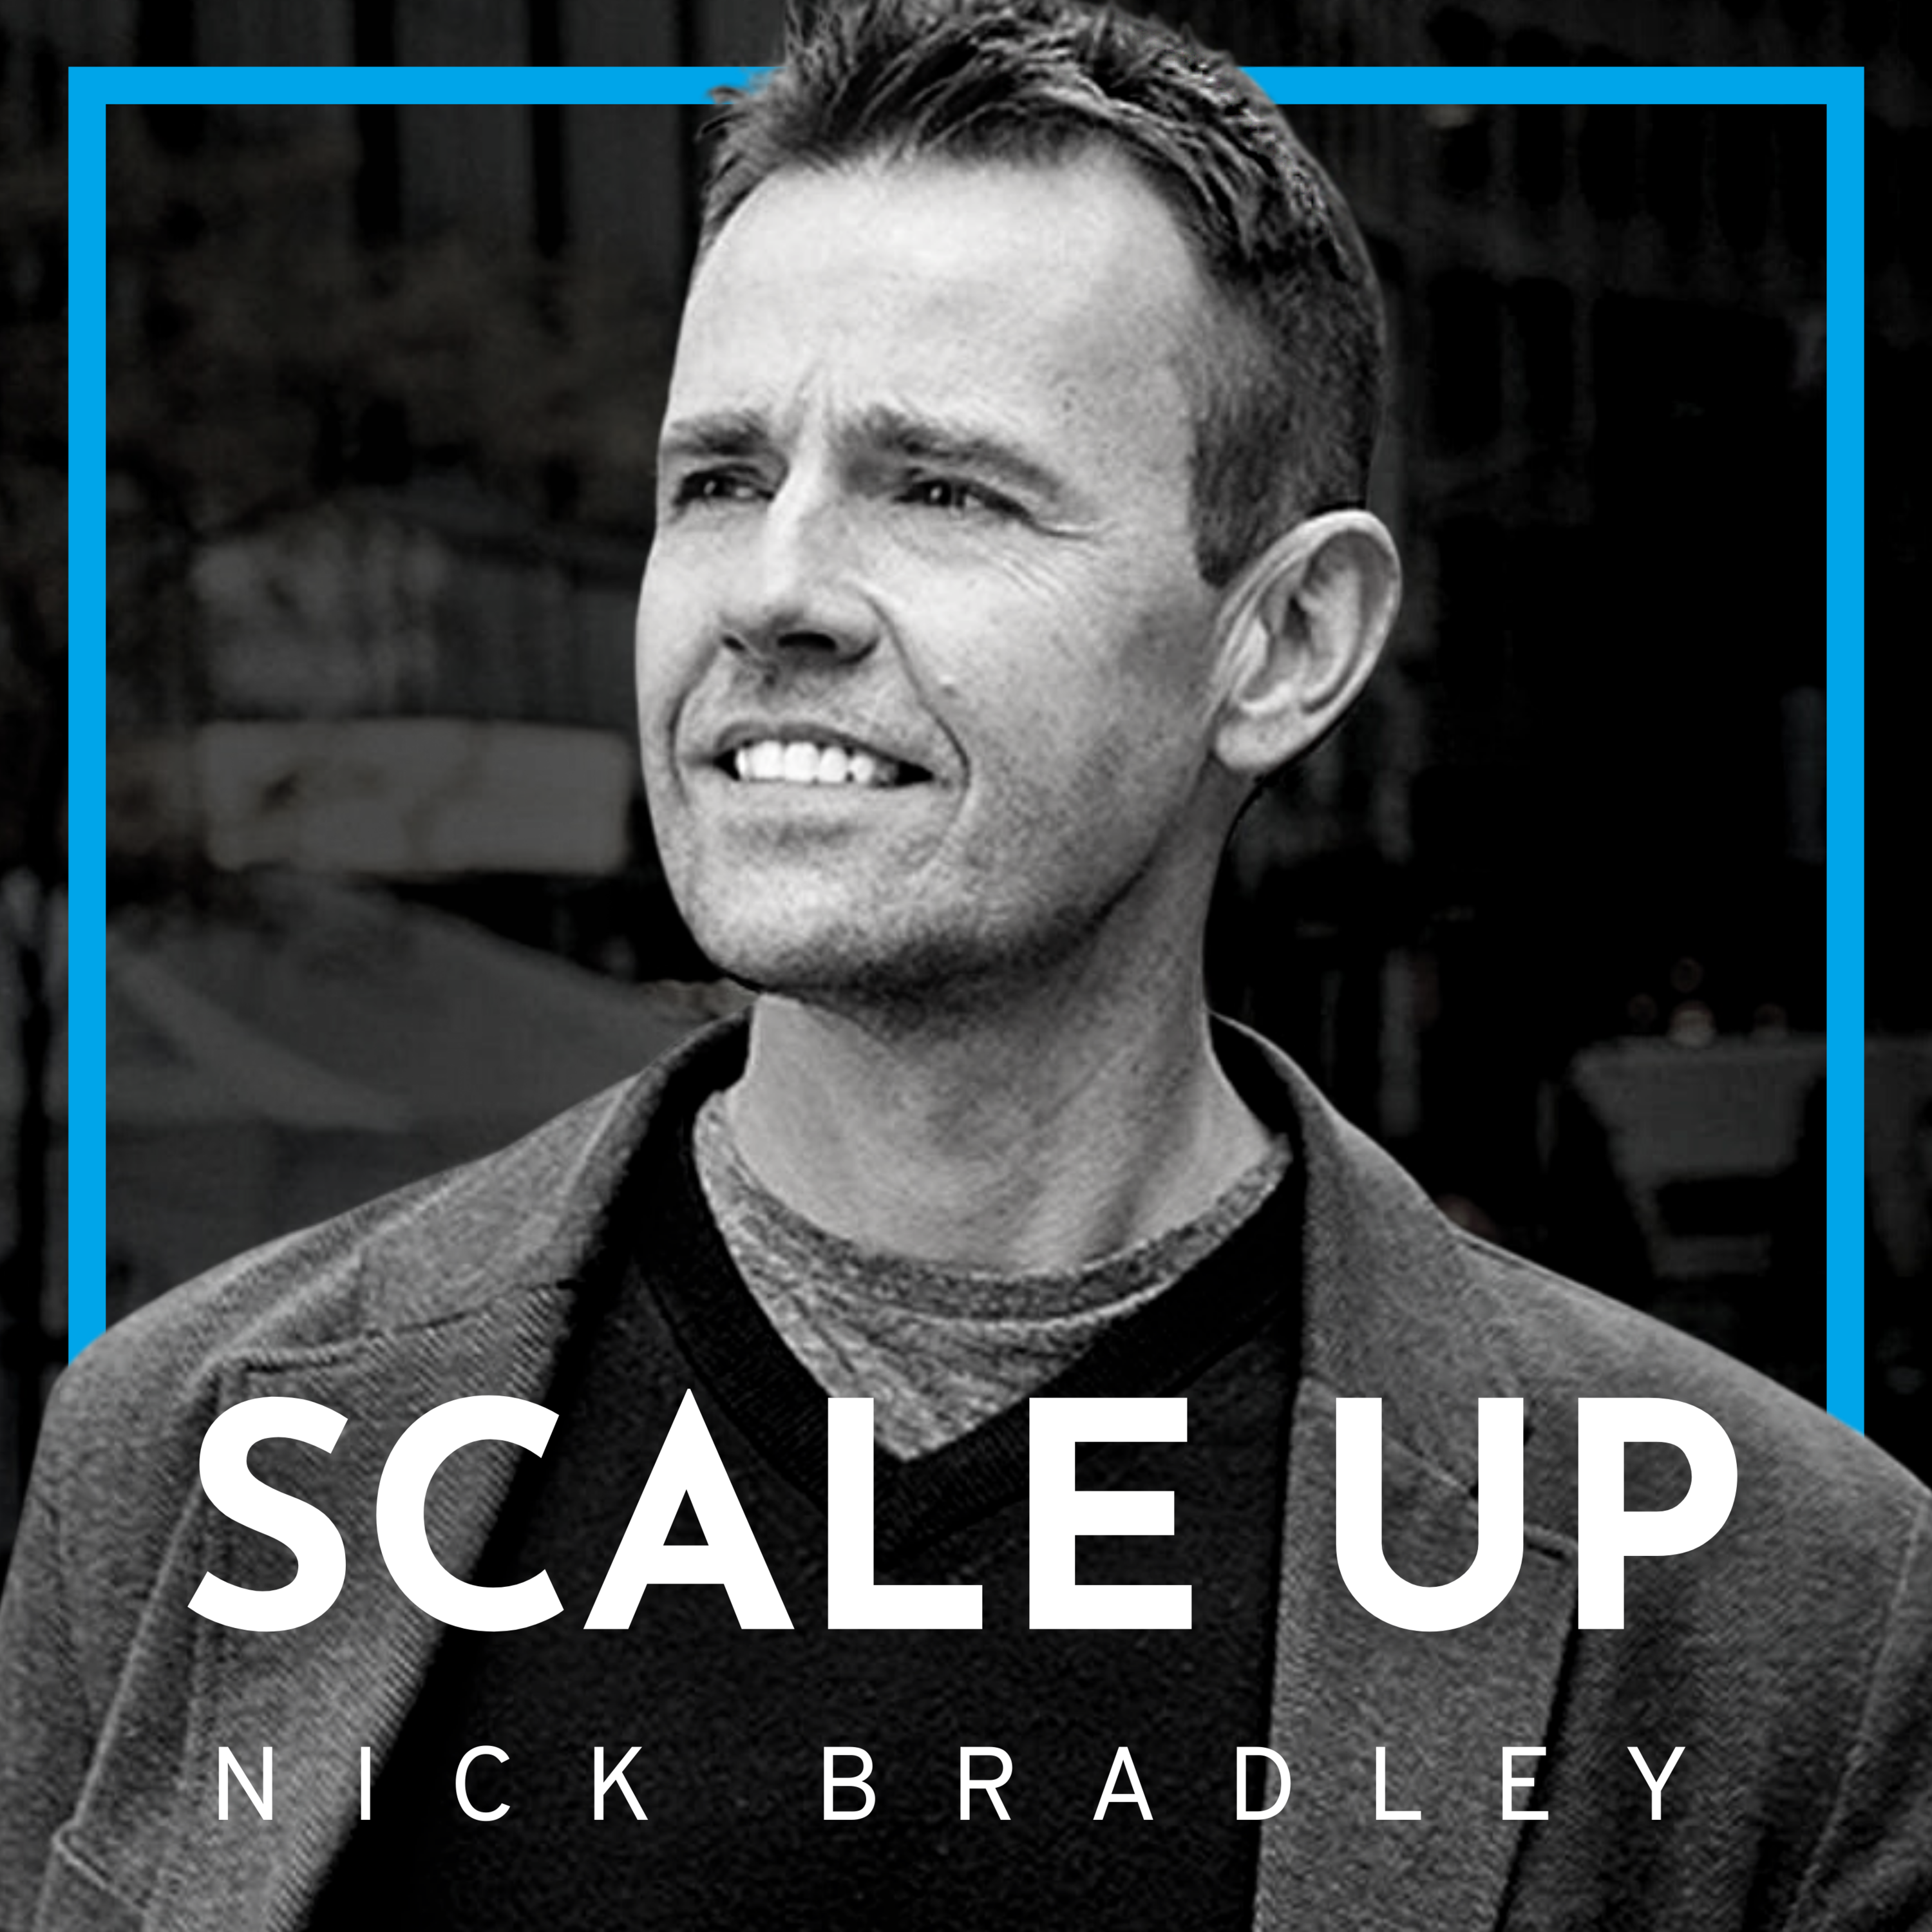 Get Ready to Scale Up with Nick Bradley